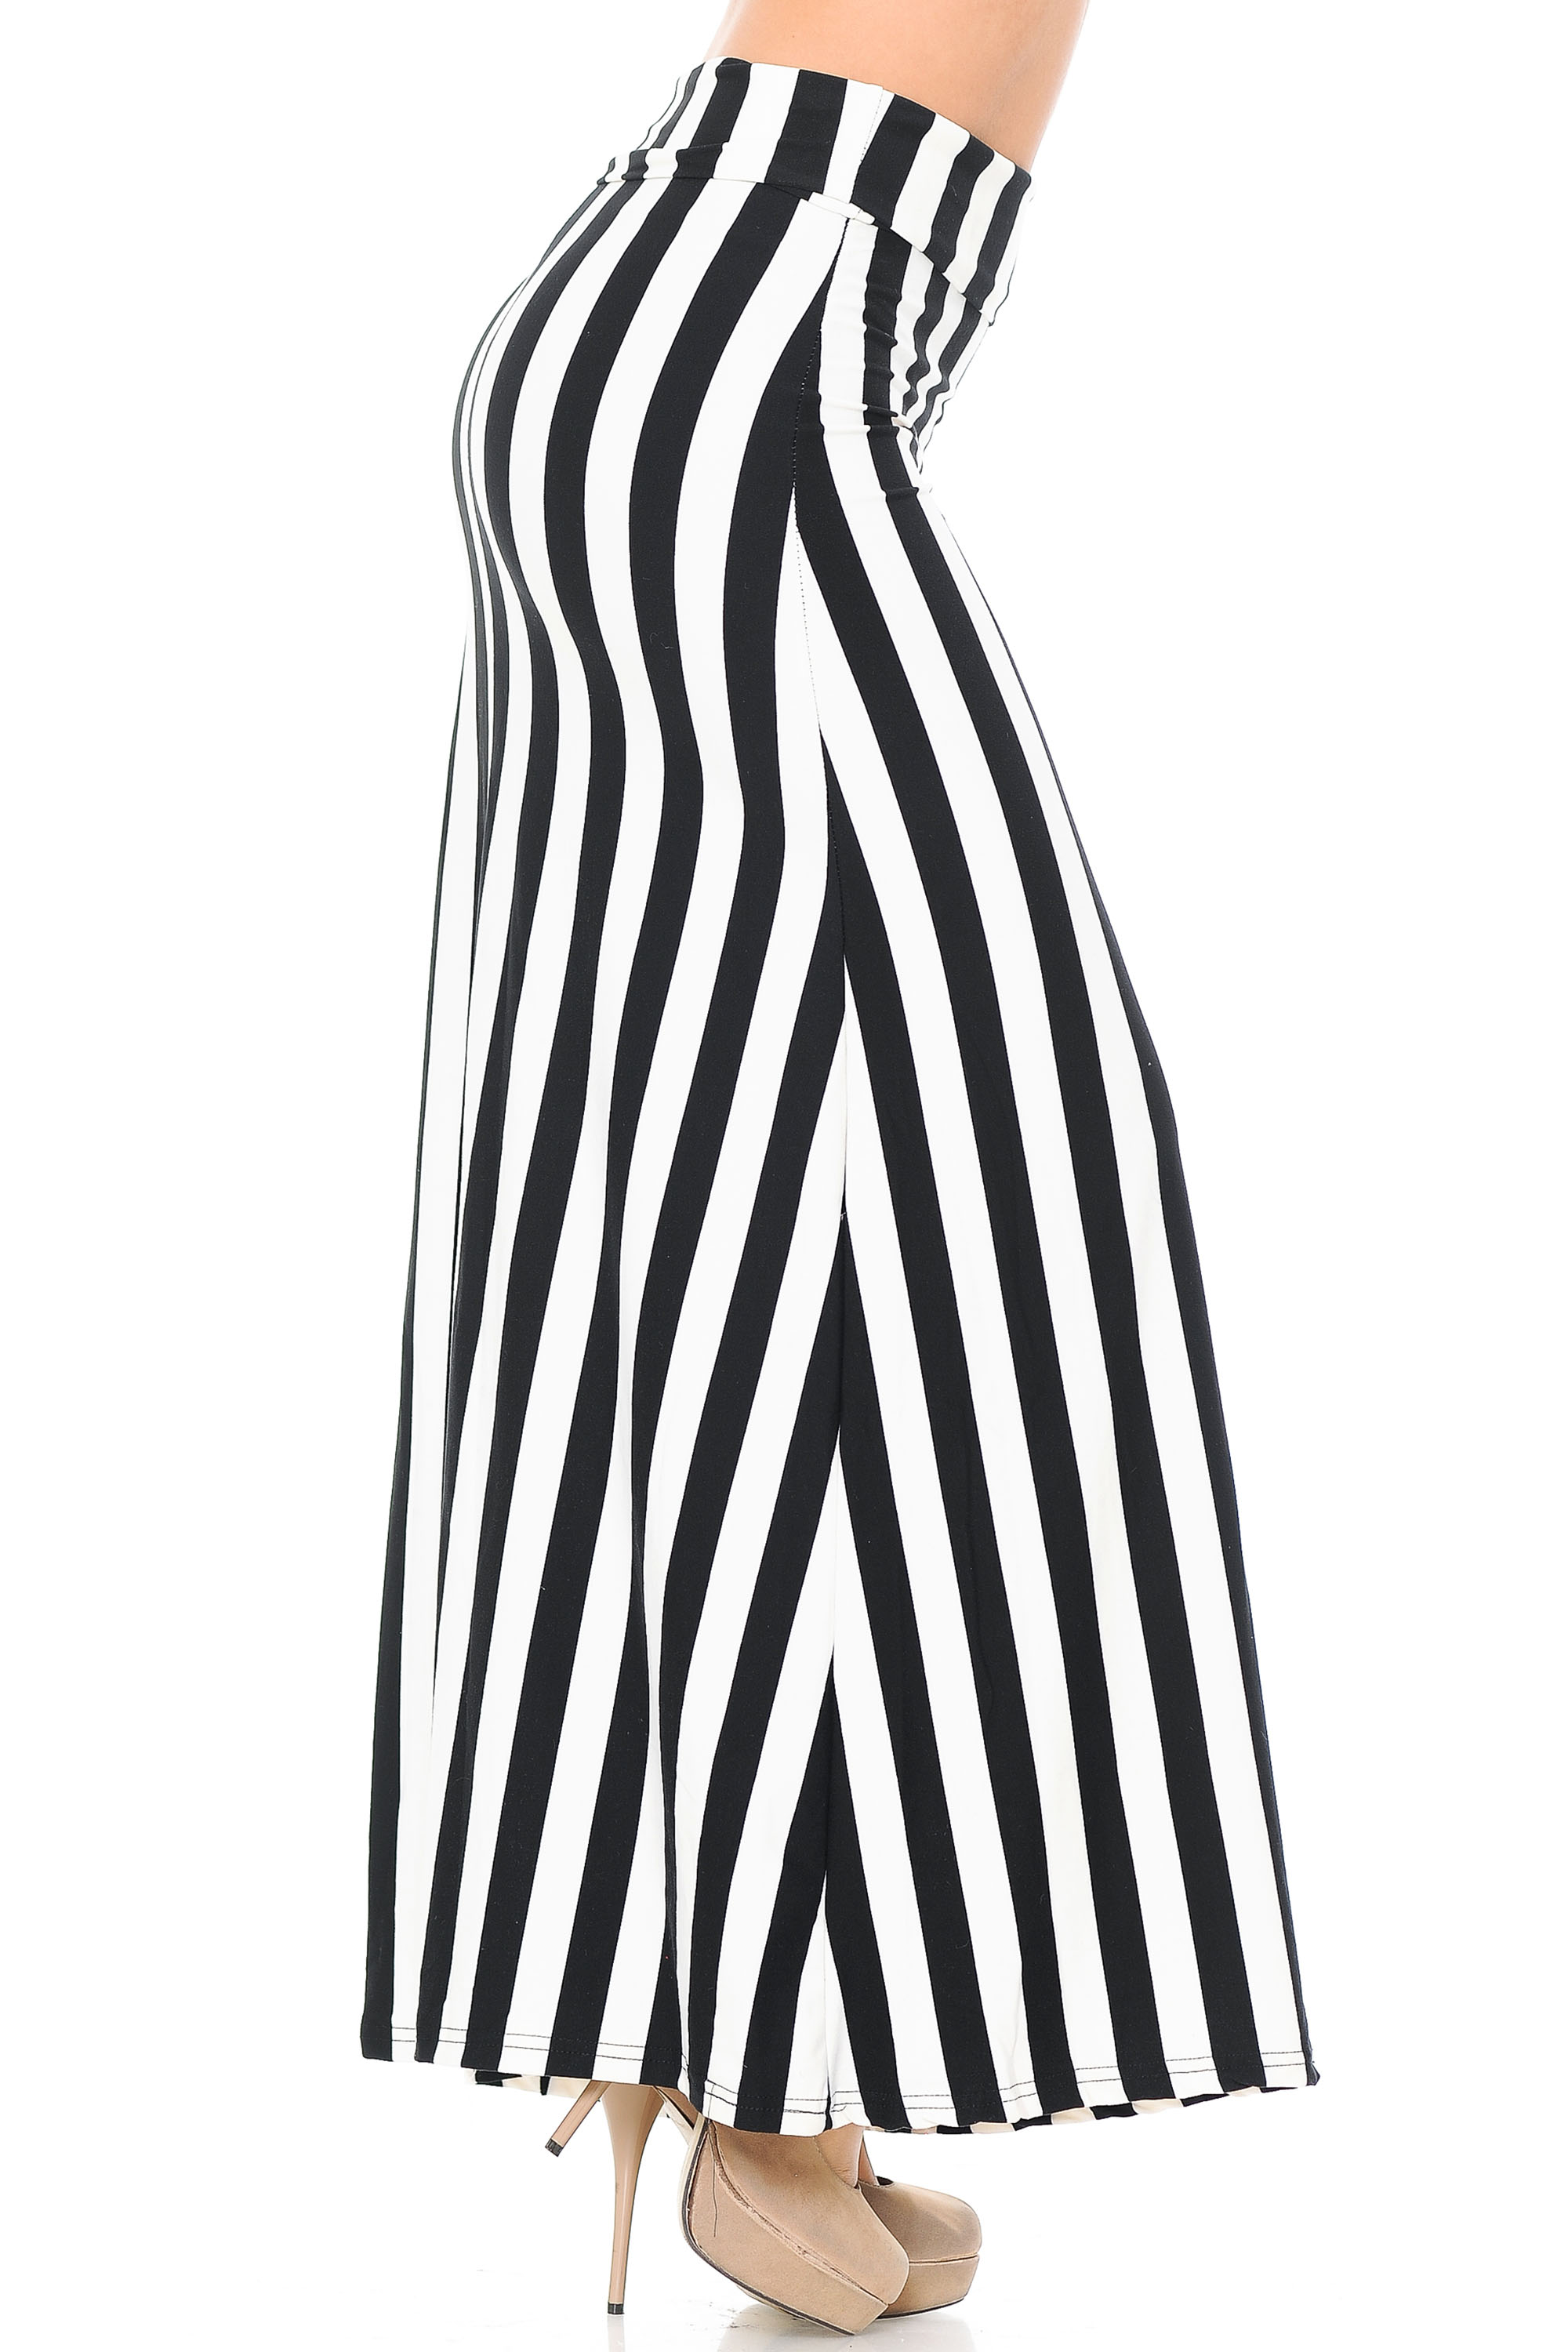 Wholesale Buttery Smooth Black and White Wide Stripe Plus Size Maxi Skirt